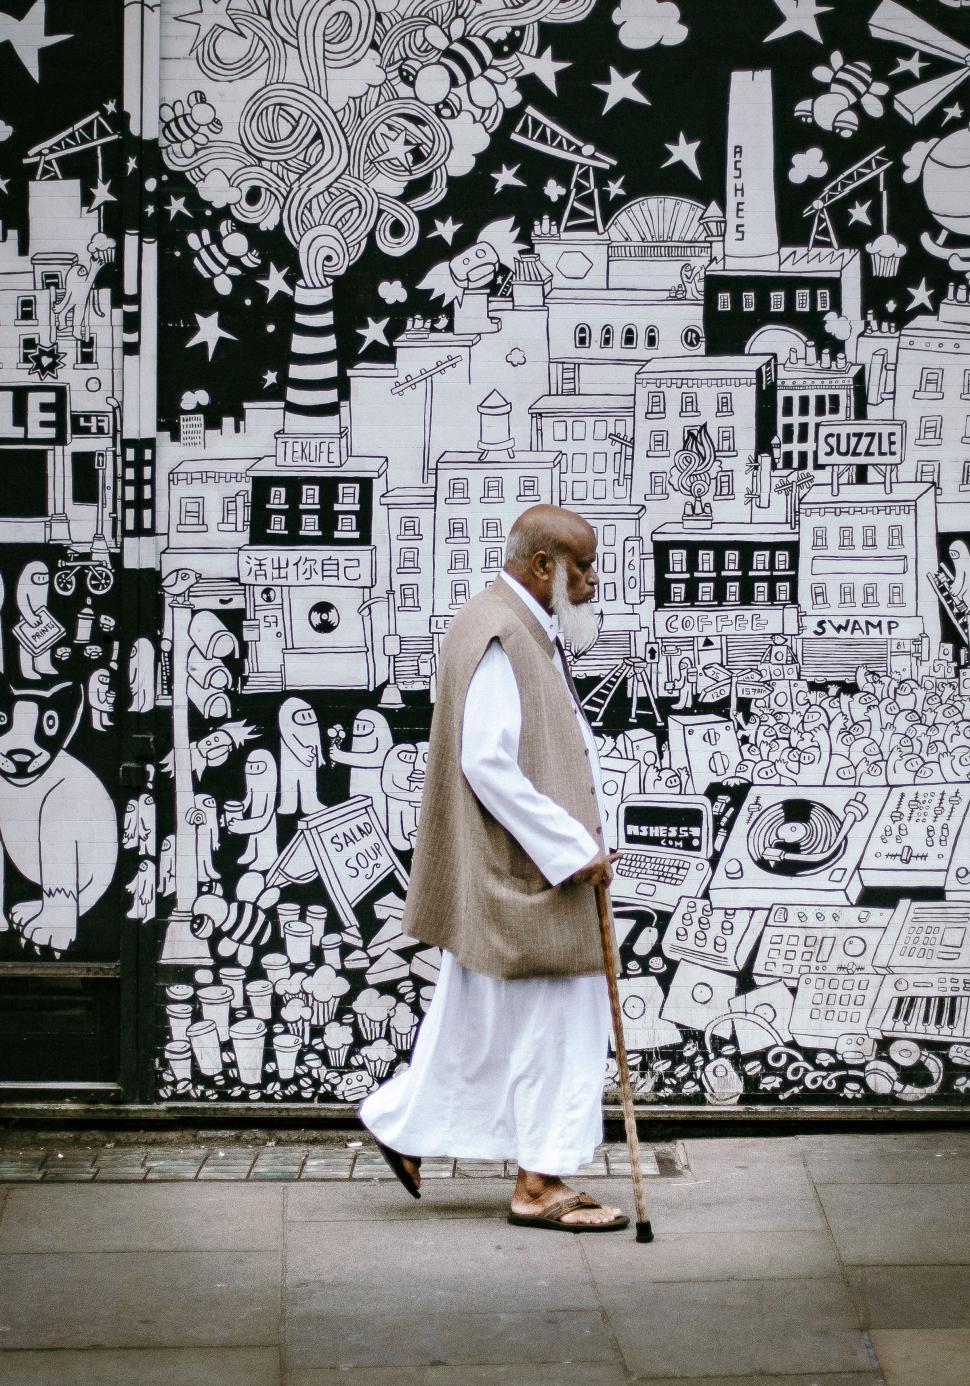 Free Image of Man Standing in Front of Mural Wall 